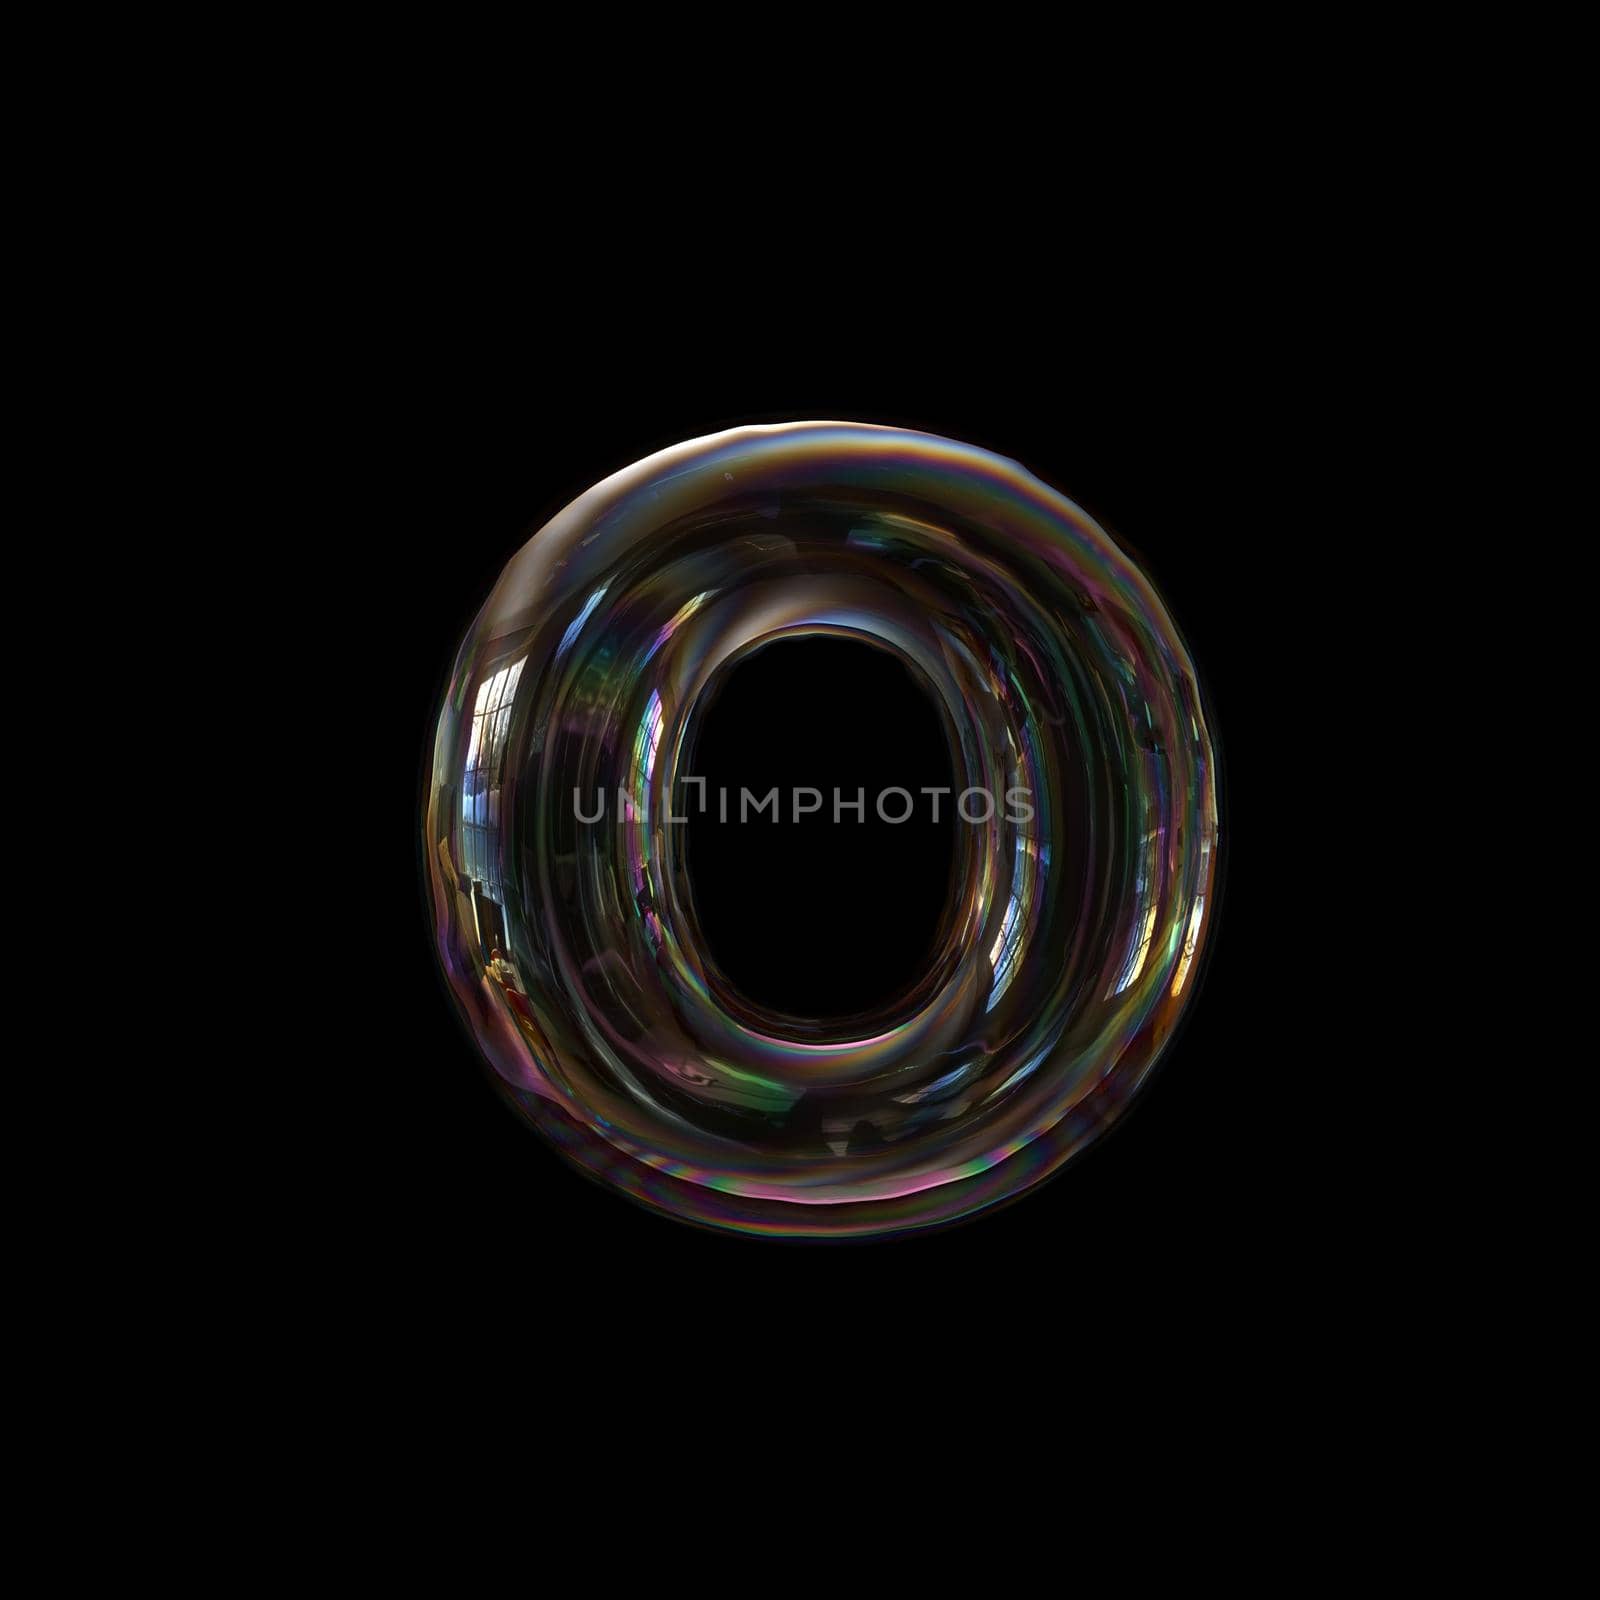 soap bubble font O - Small 3d letter isolated on a black background.
This 3d font collection is well-suited for various creative projects including but not limited to : Childhood. events. nature...